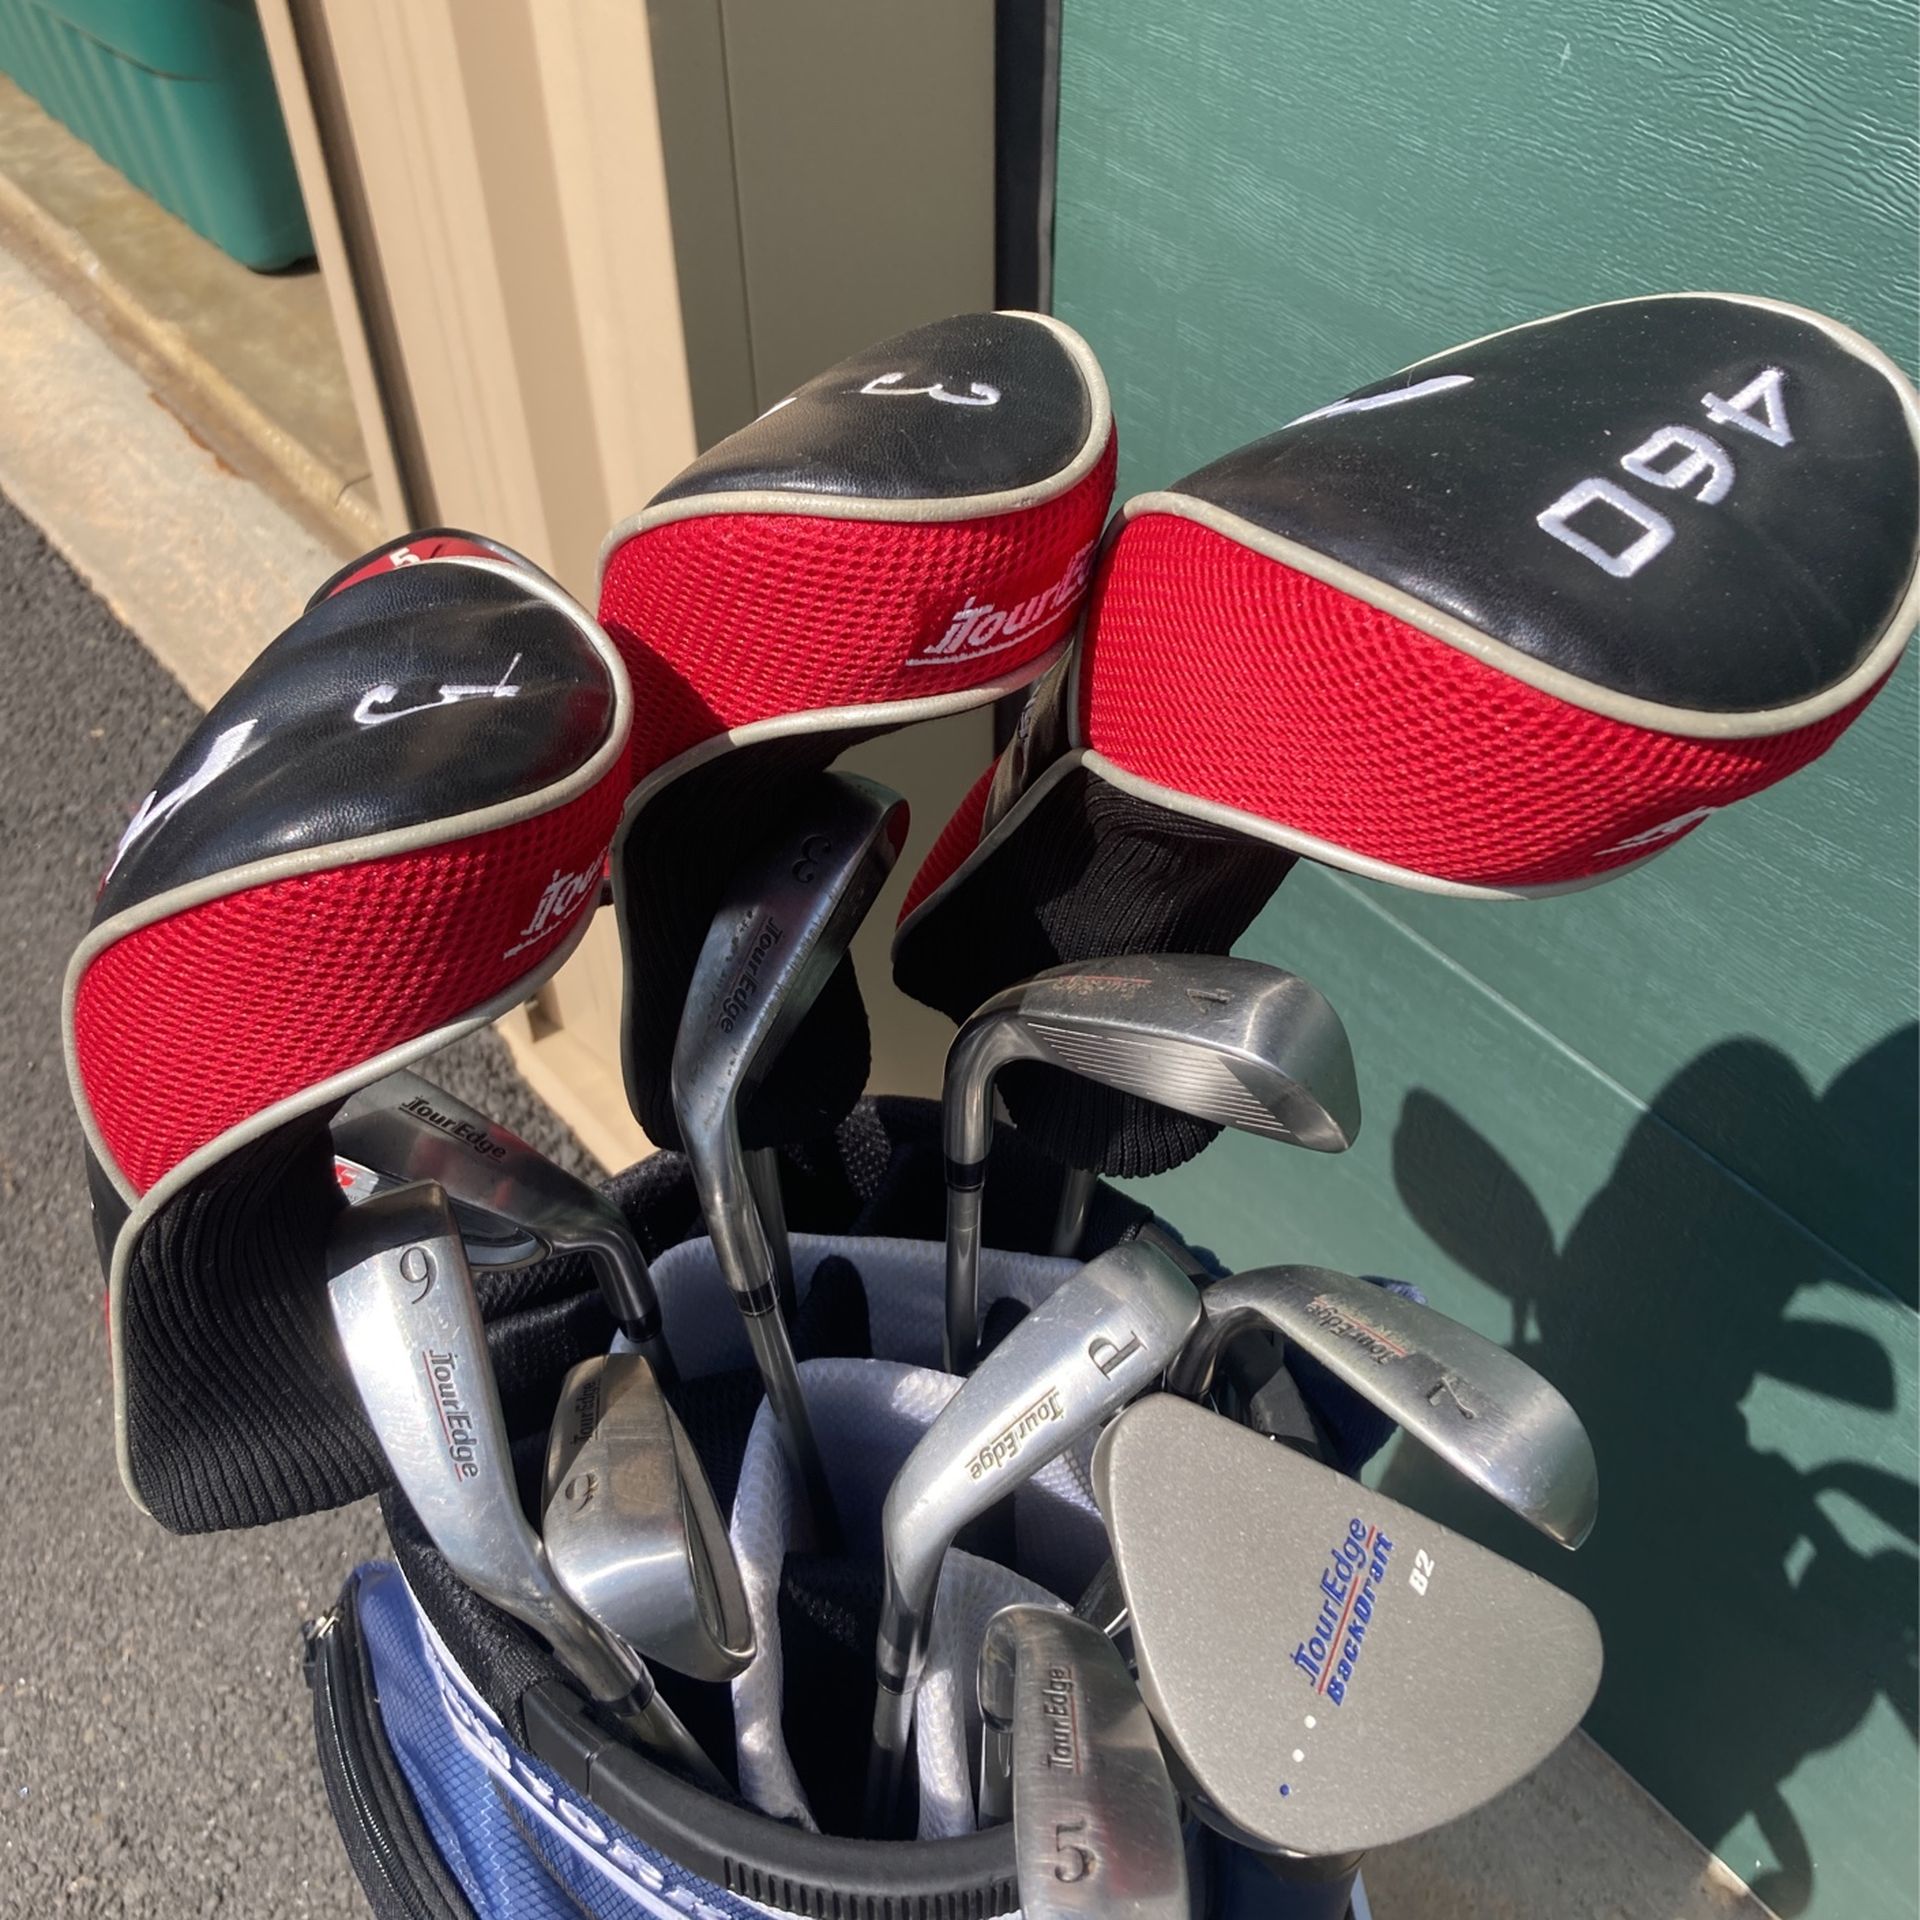 Golf Clubs And New York Yankees Bag for Sale in Peekskill, NY - OfferUp